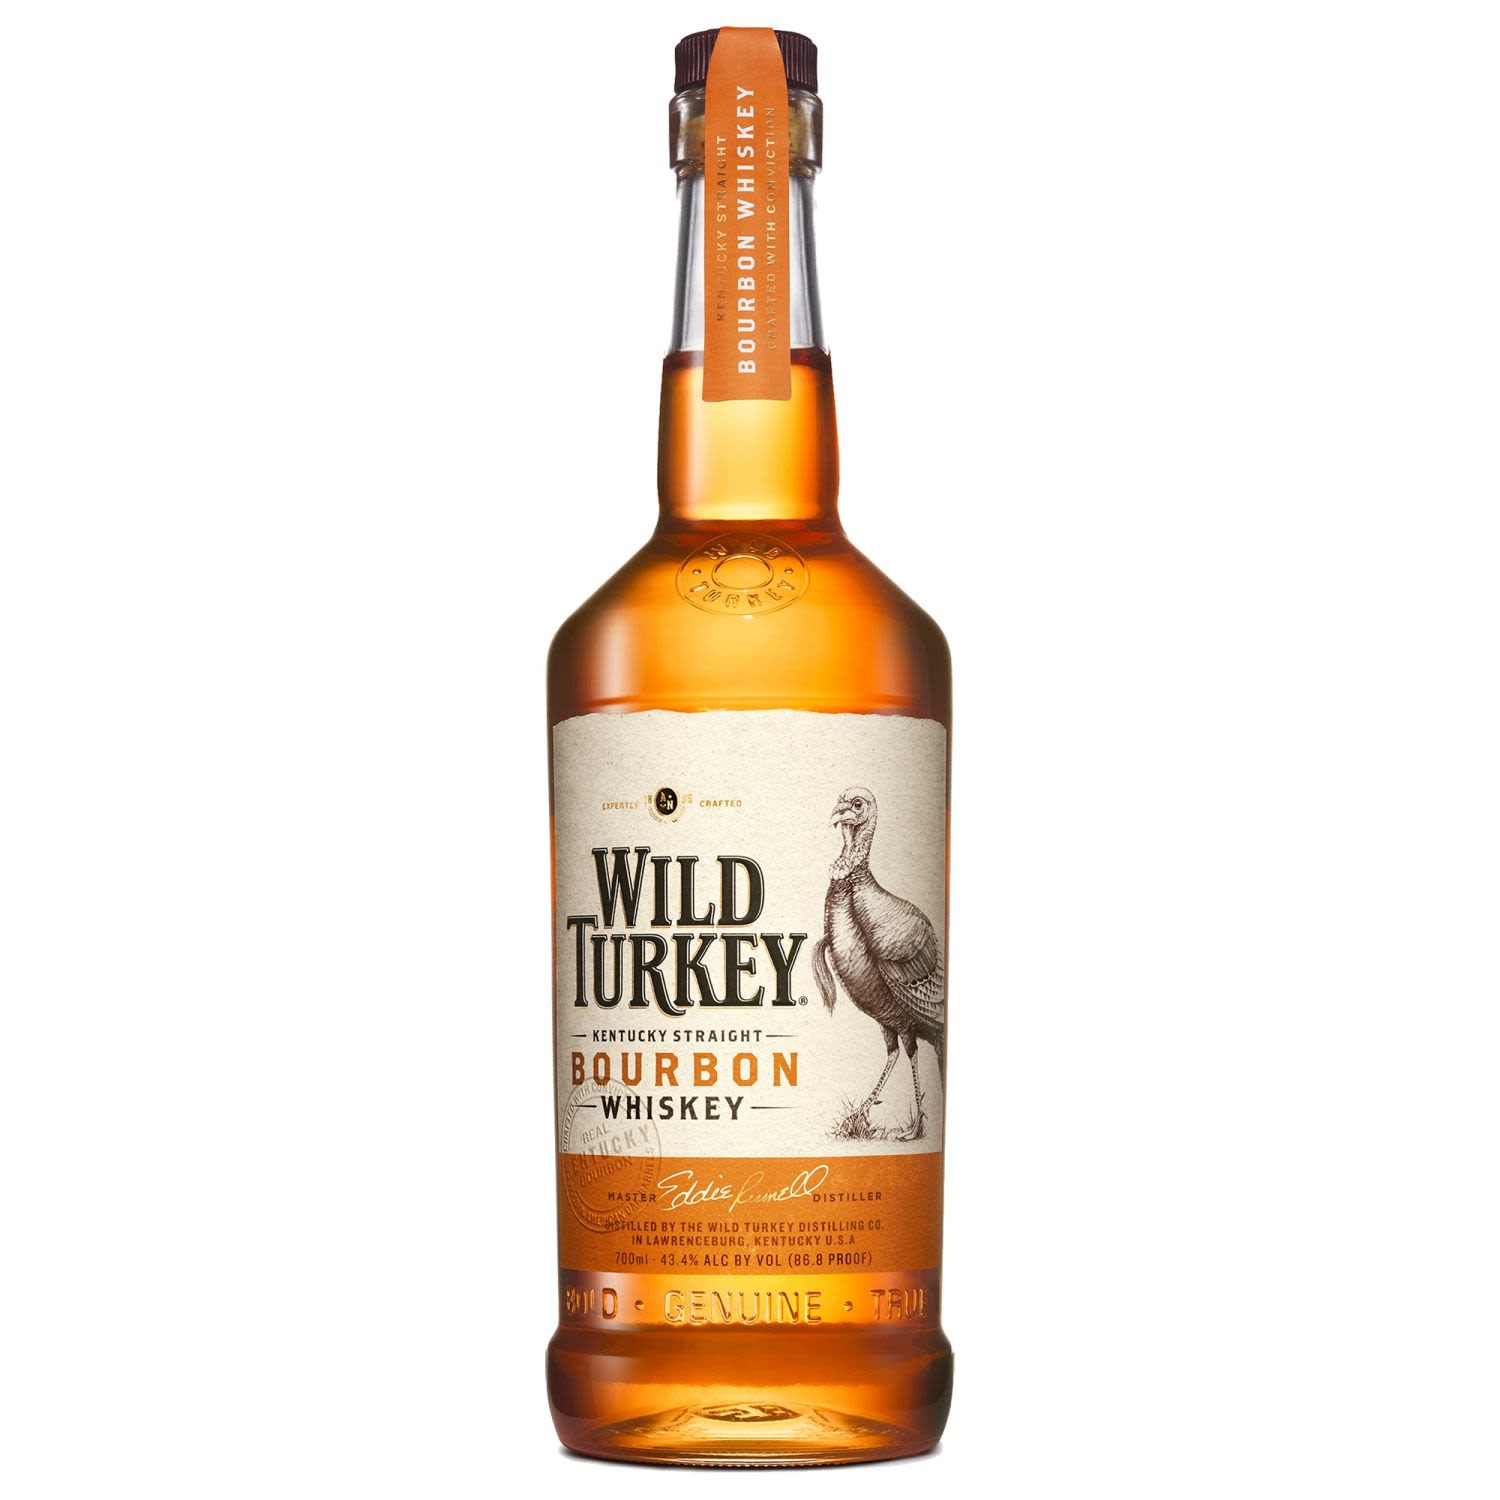 Wild Turkey is a genuine Kentucky Bourbon, matured in new charred white oak barrels to give it's unique smoothness. Best consumed neat to appreciate it's character; can also be consumed on ice or with cola or dry ginger ale.<br /> <br />Alcohol Volume: 43.40%<br /><br />Pack Format: Bottle<br /><br />Standard Drinks: 24</br /><br />Pack Type: Bottle<br /><br />Country of Origin: USA<br />